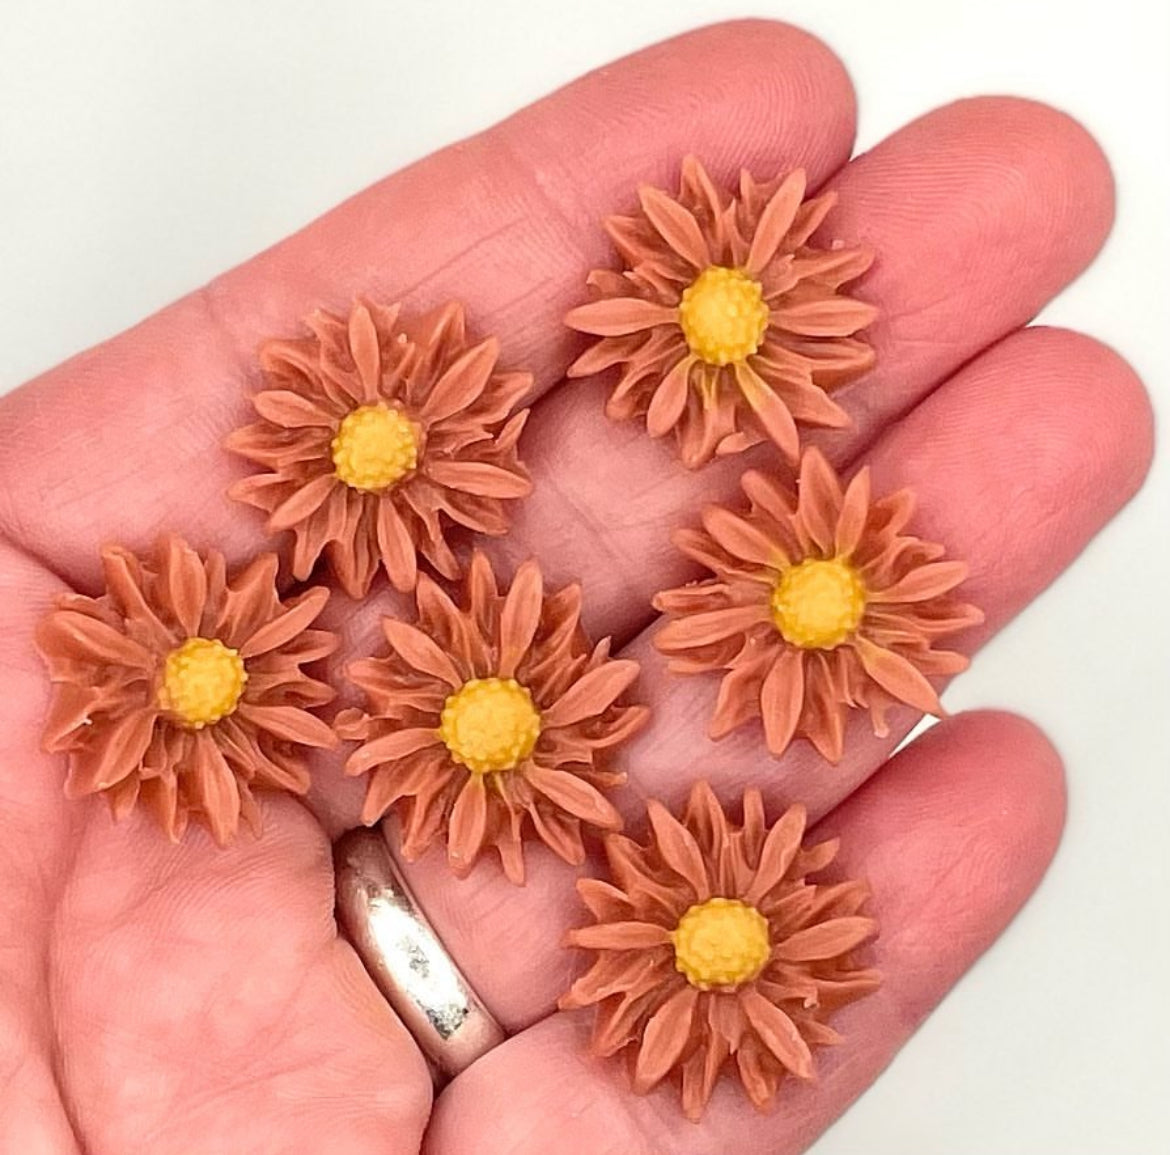 hand holding small soap dough flowers